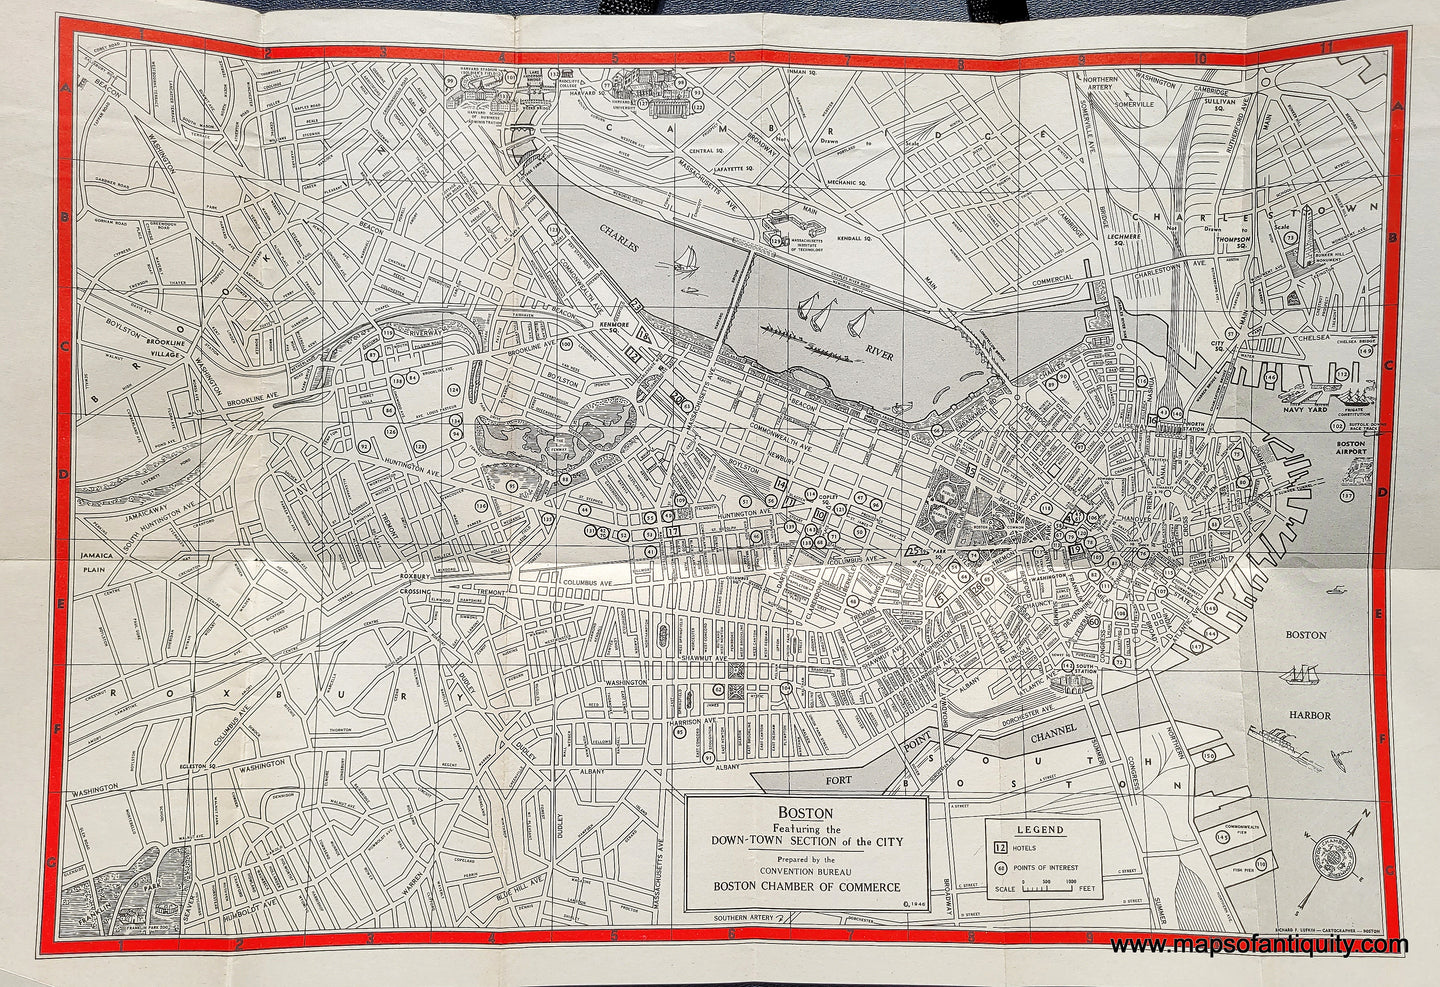 Vintage-Map-Boston-Featuring-the-Down-Town-Section-of-the-City-1946-Lufkin-Maps-Of-Antiquity